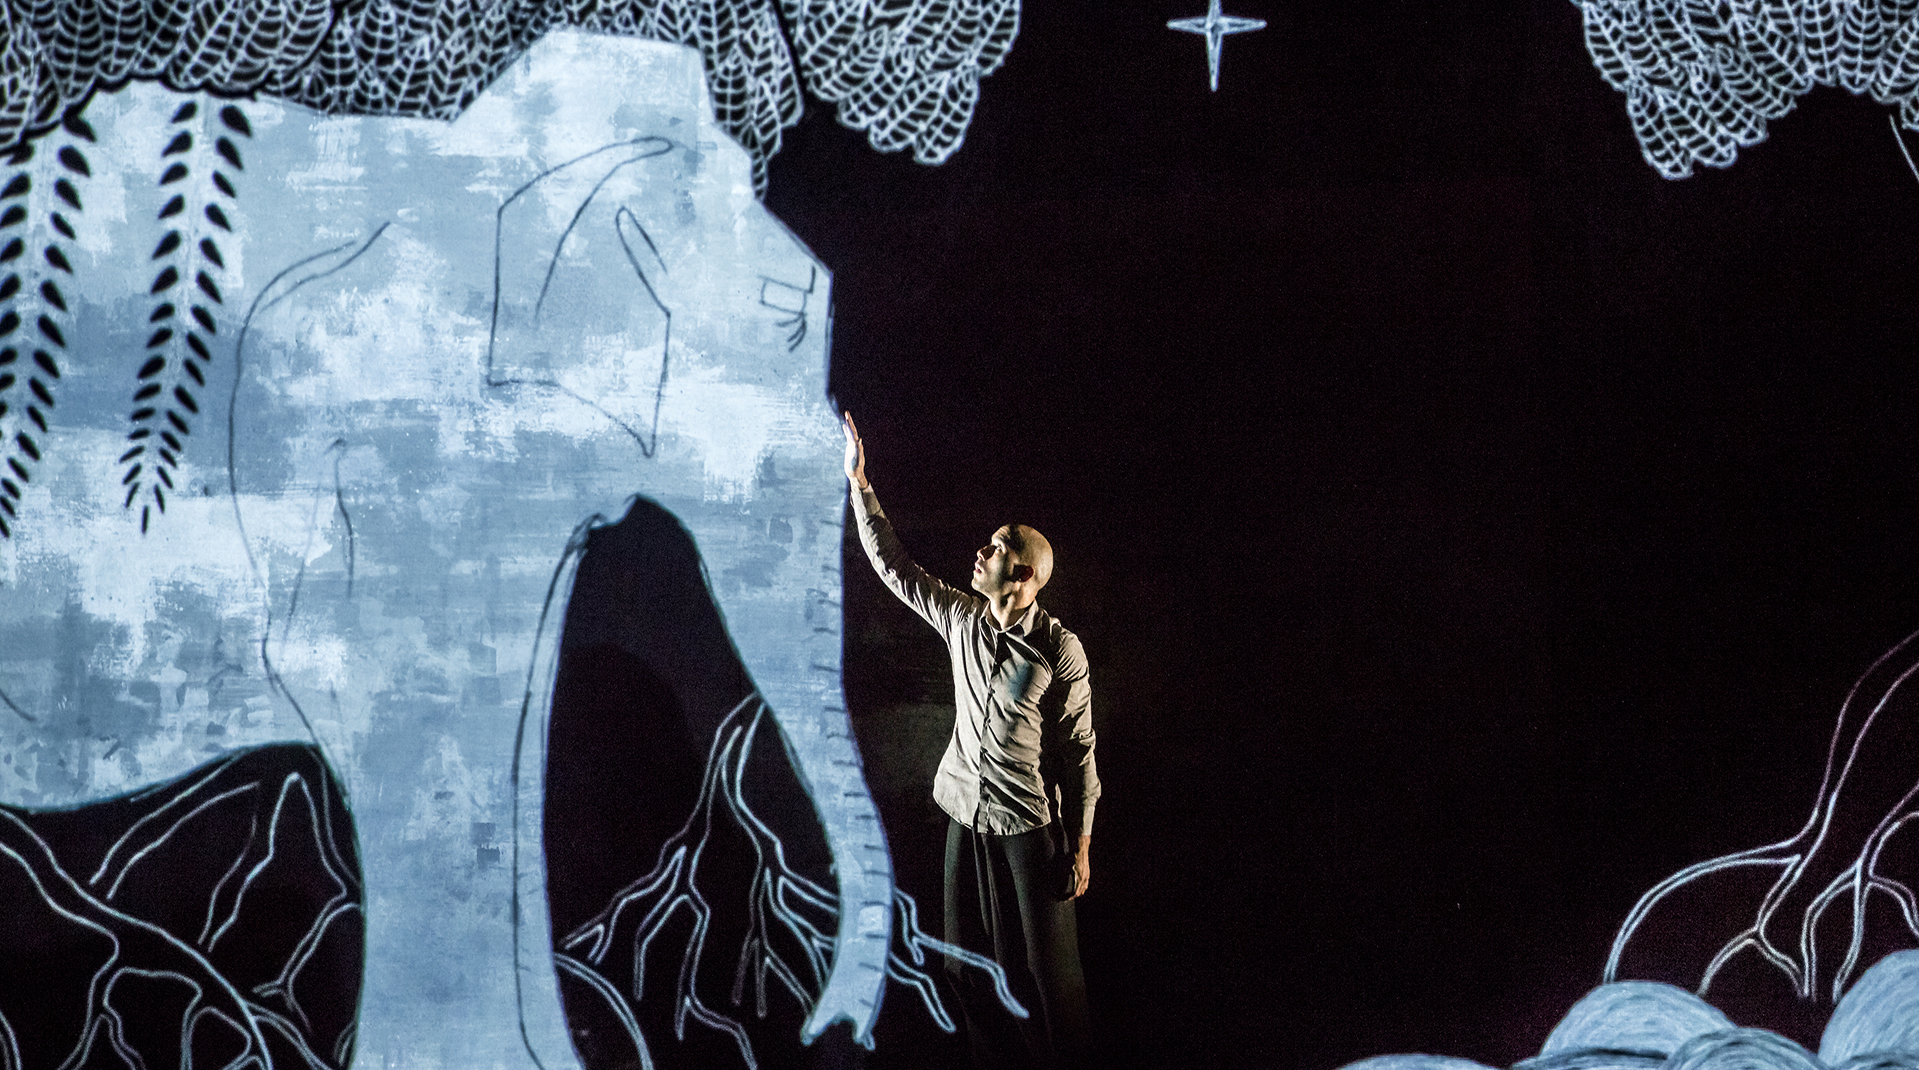 Against a black screen we see a blue drawn elephant and shrubs projected. Standing touching the elephant's trunk is a dancer wearing black trousers and a light linen shirt.